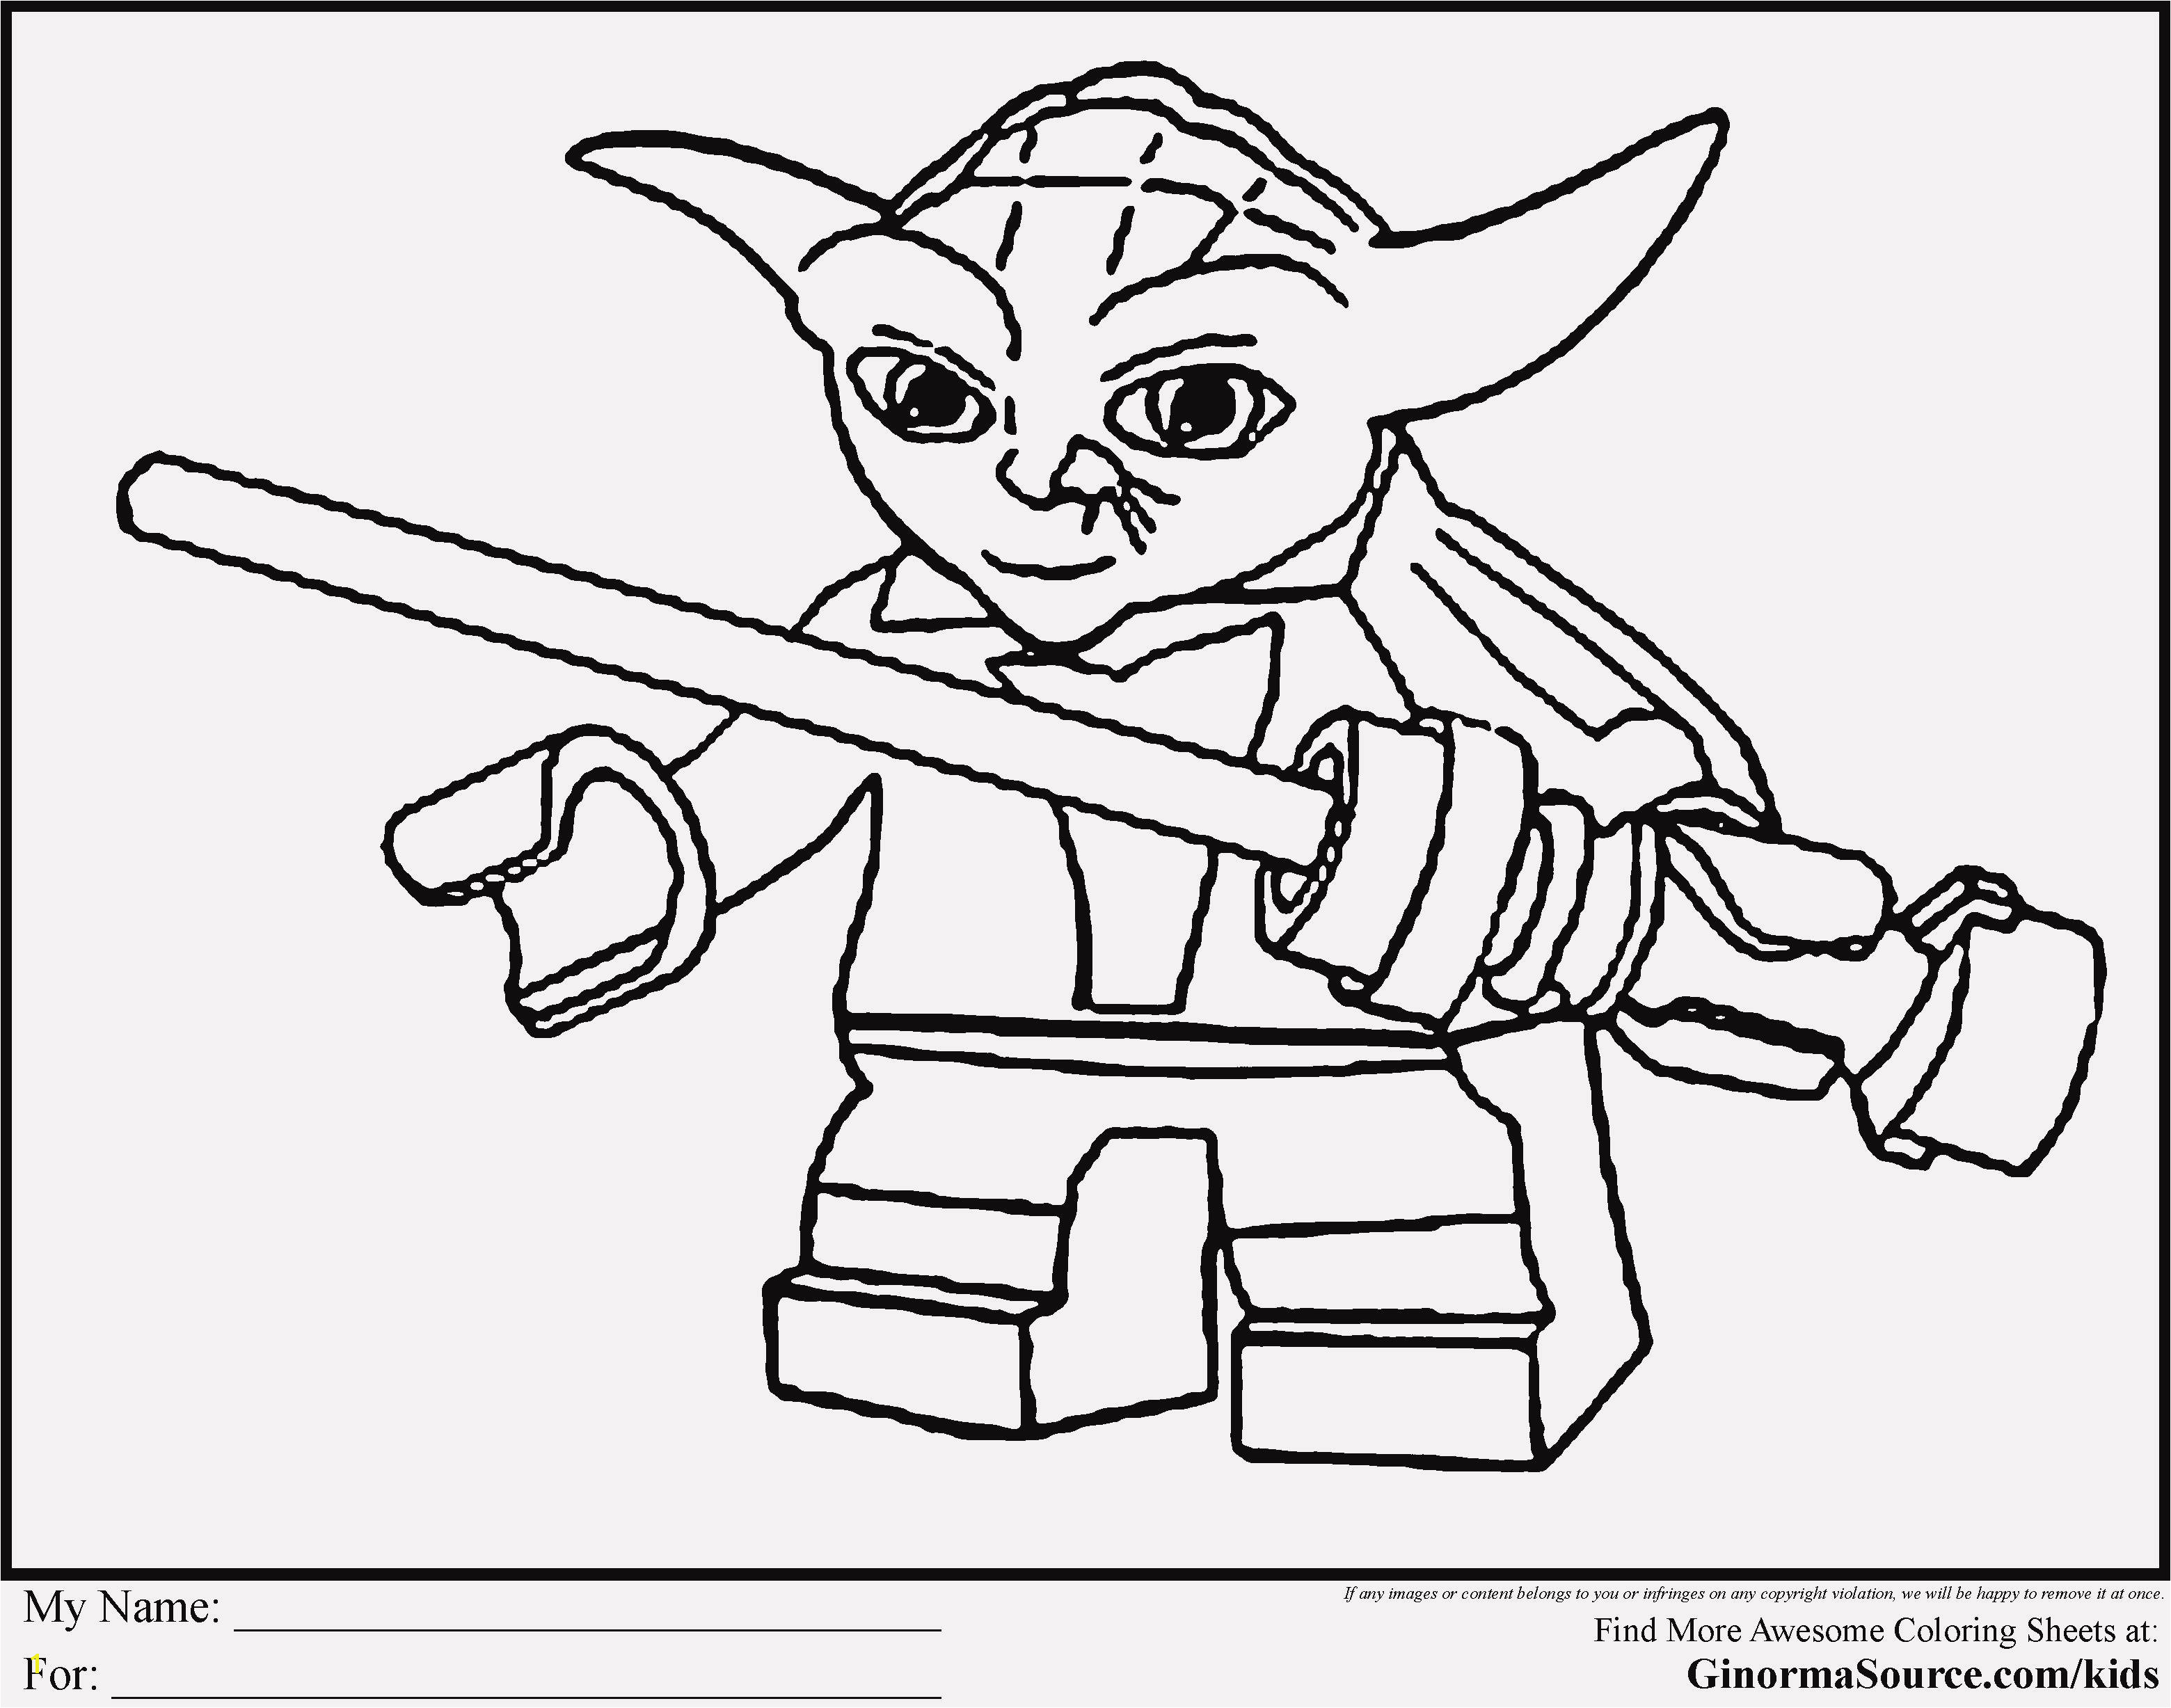 Lego Star Wars Coloring Pages Elegant Awesome Free Lego Star Wars Coloring Pages – Coloring Sheets